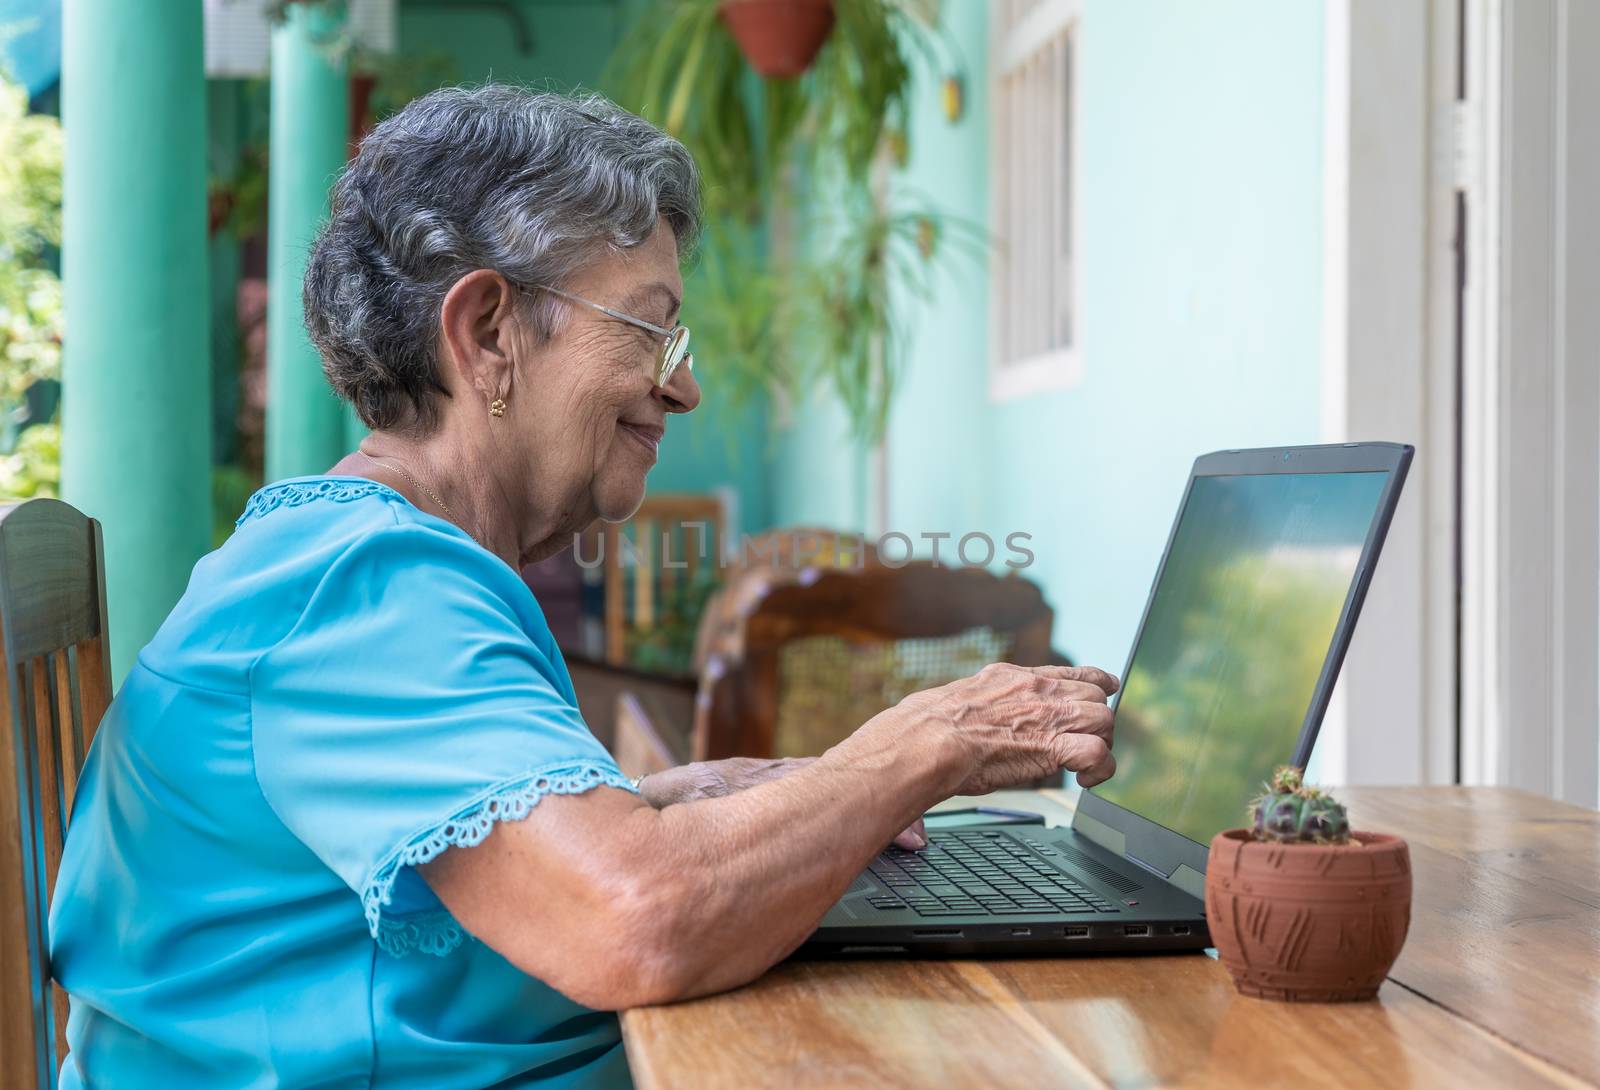 Smiling elderly woman wearing glasses with a laptop